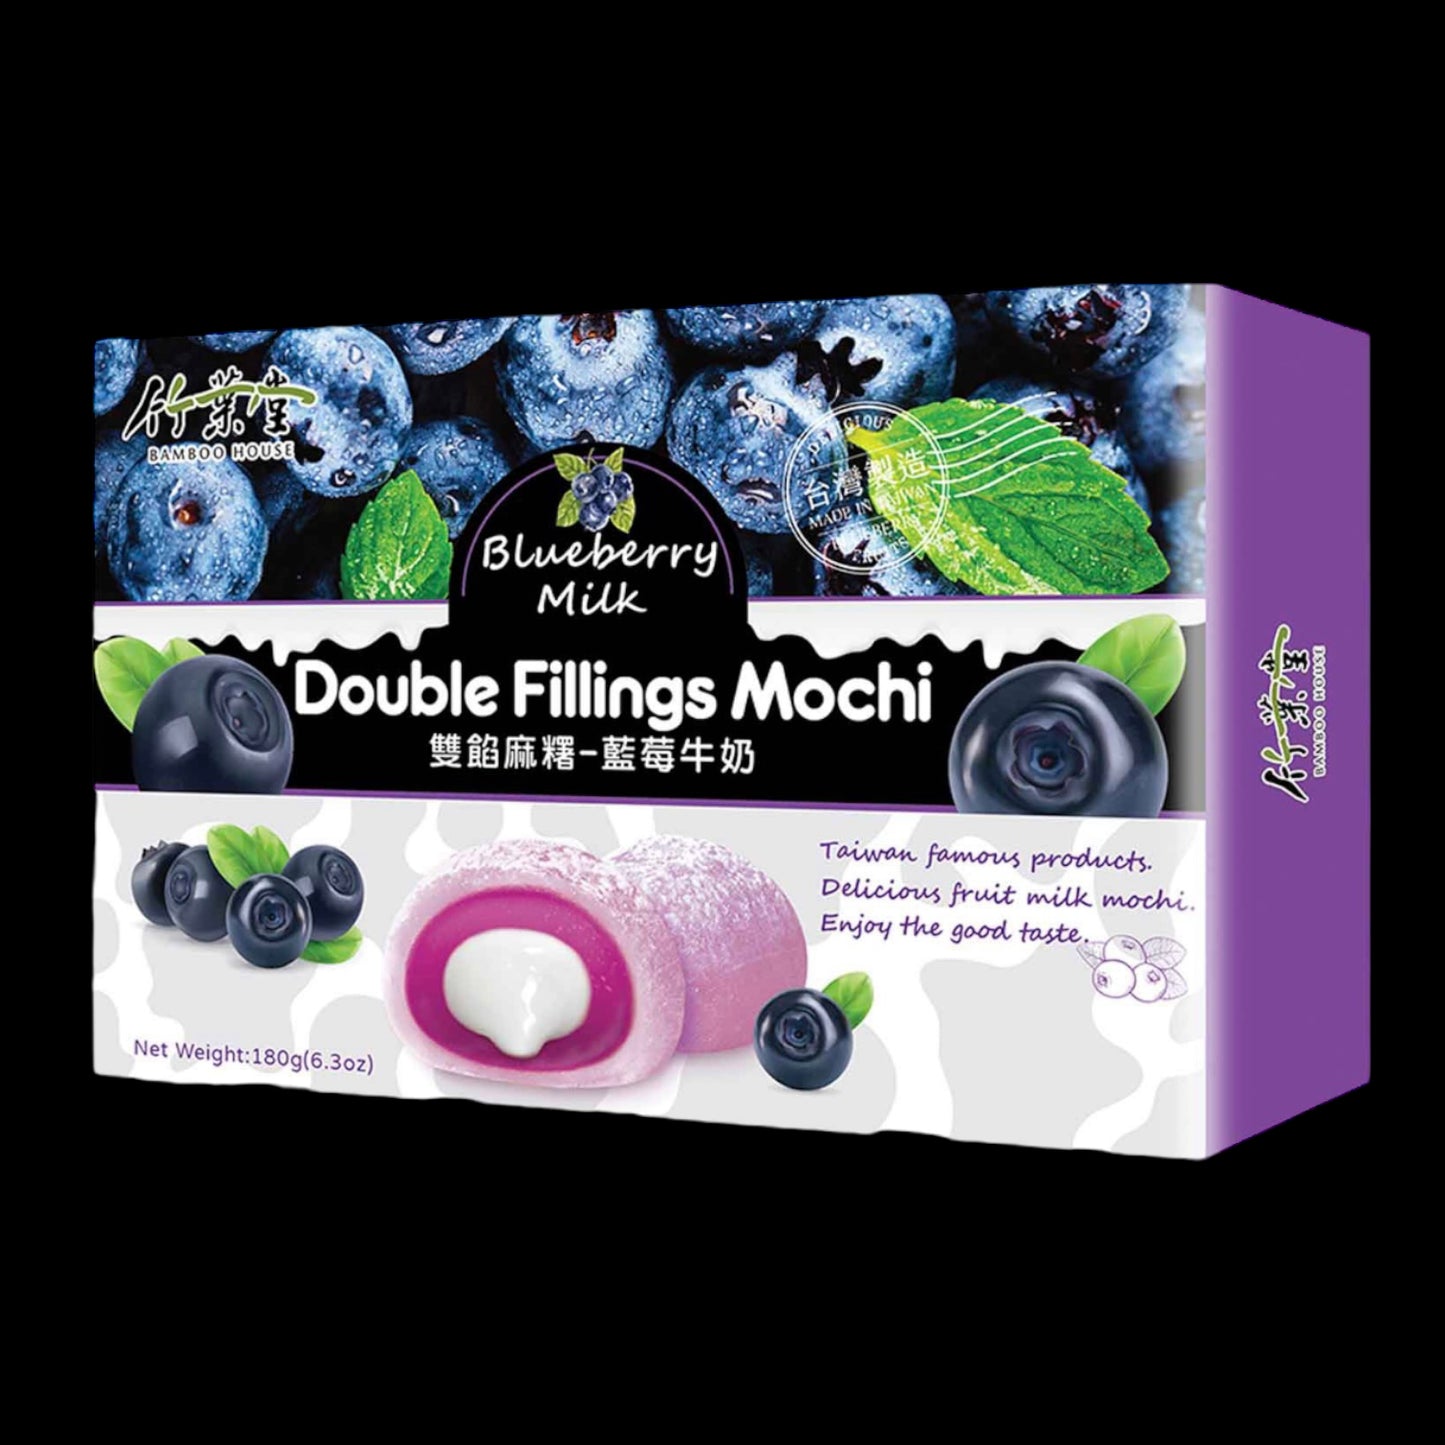 Bamboo House Double Fillings Mochi Blueberry Milk 180g